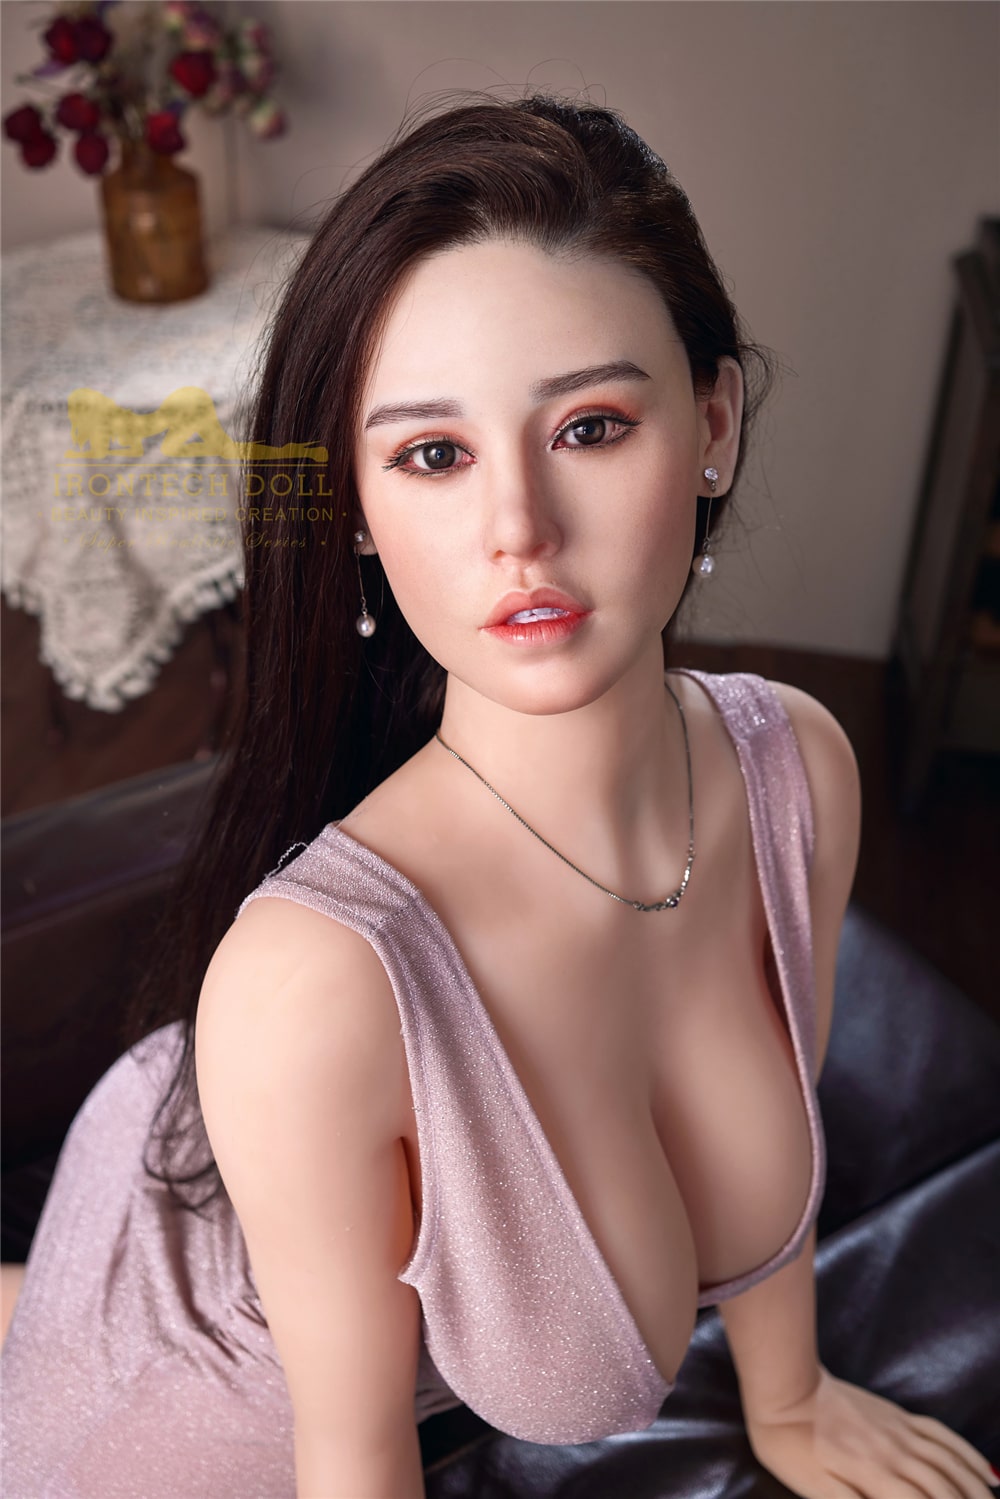 Katana Busty Japanese Sex Doll picture picture